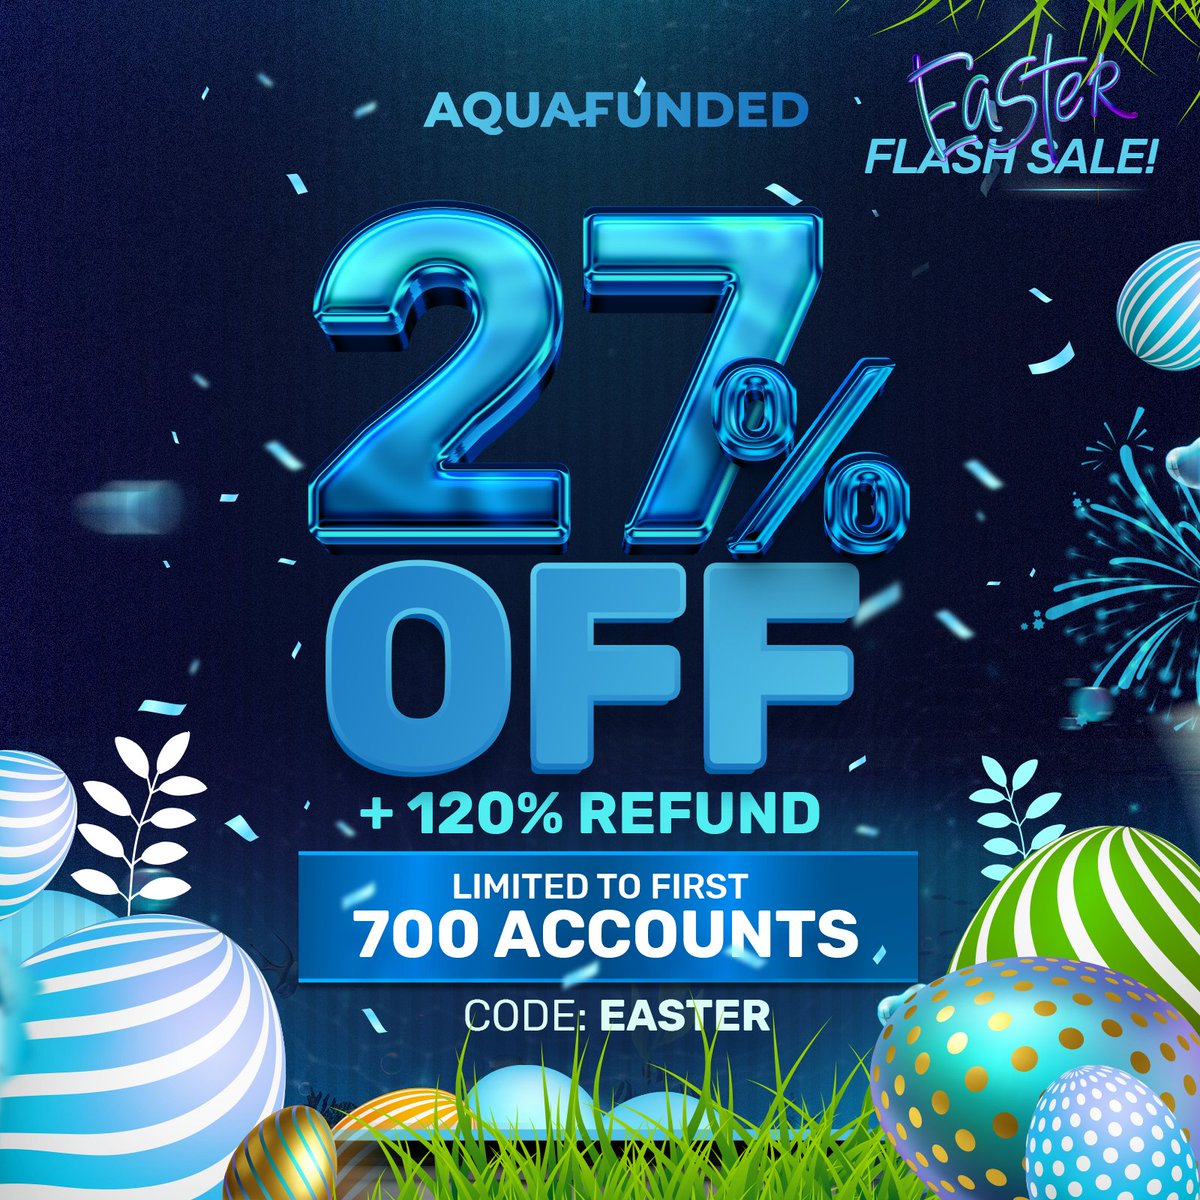 27% OFF All Accounts Easter Flash Sale 🐣🌸 Only for 700 Accounts 💙 120% Refund 💙 90% Profit Split ⏳ Limited Time Promo Make Waves with Trading 🌊 Get your Accounts Today aquafunded.com/?el=x